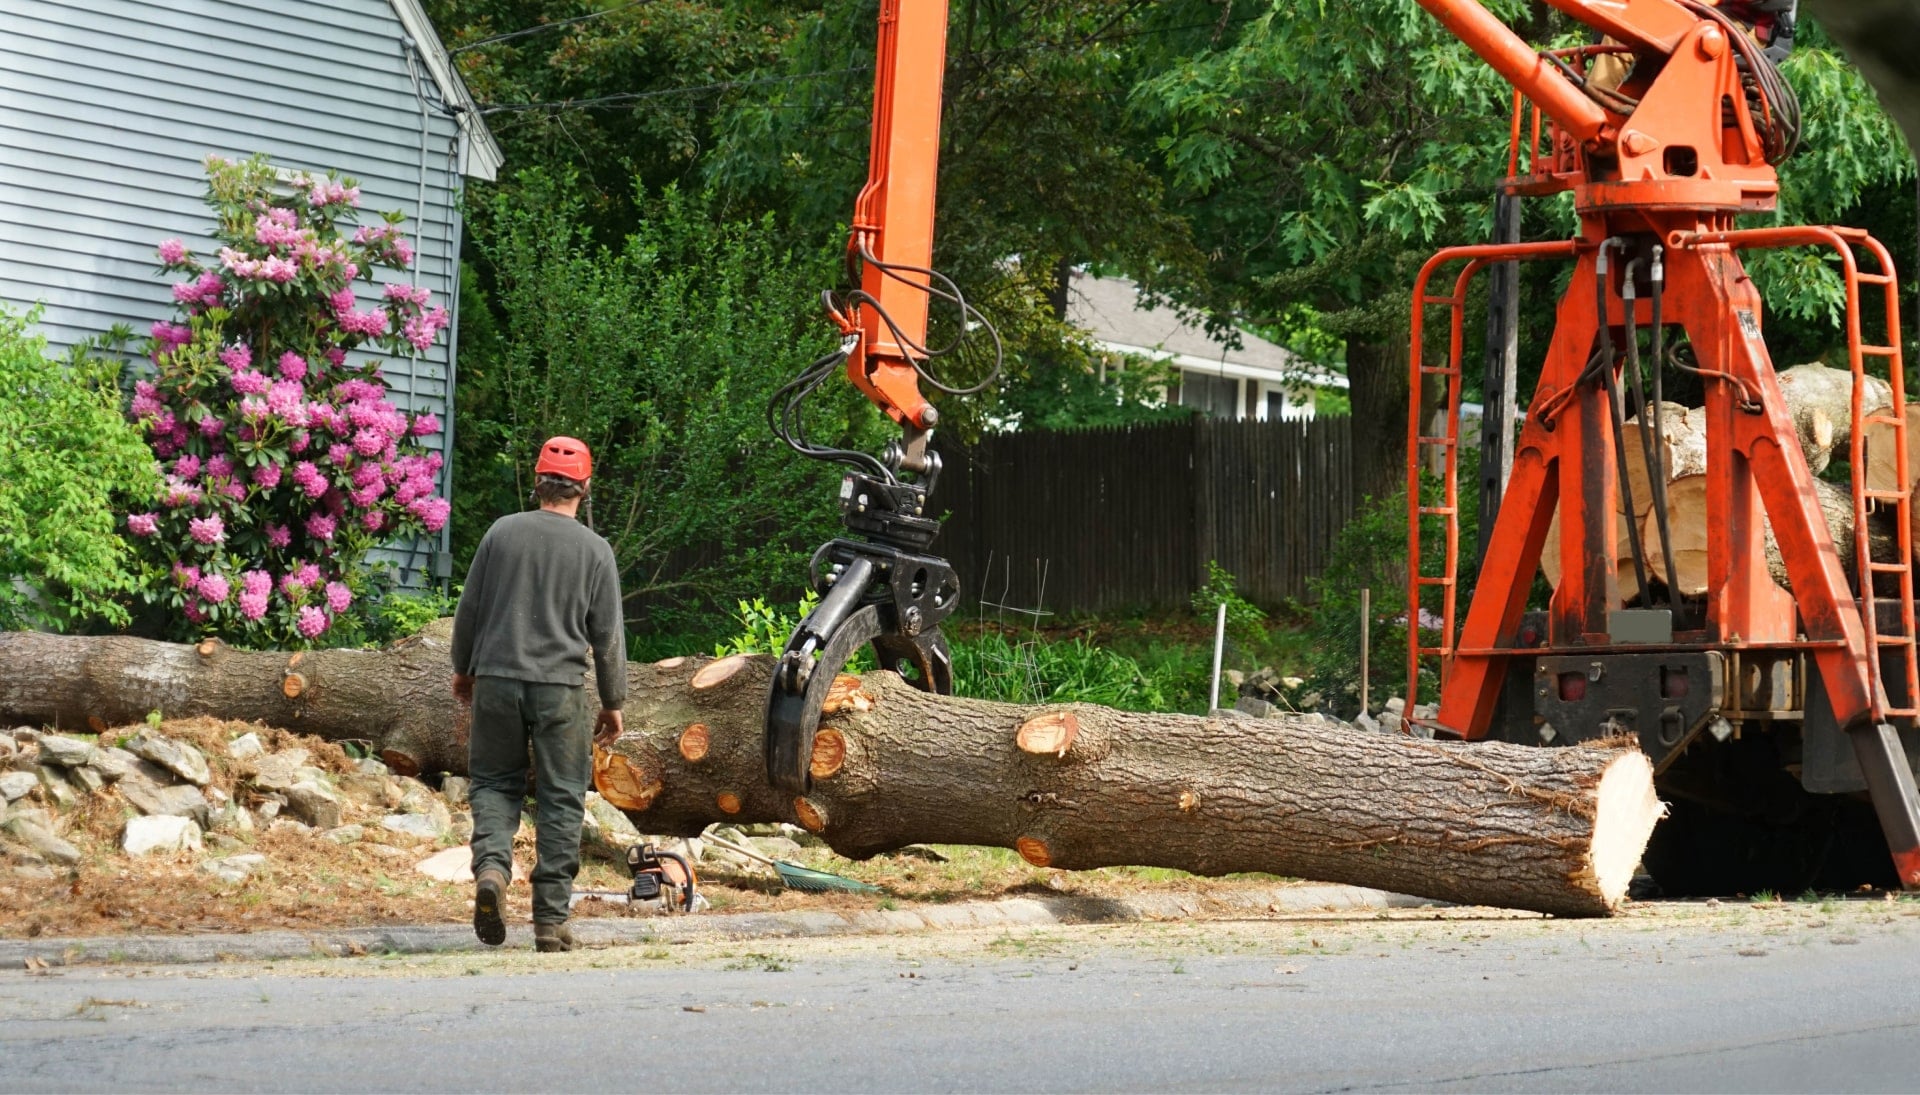 Local partner for Tree removal services in Sacramento